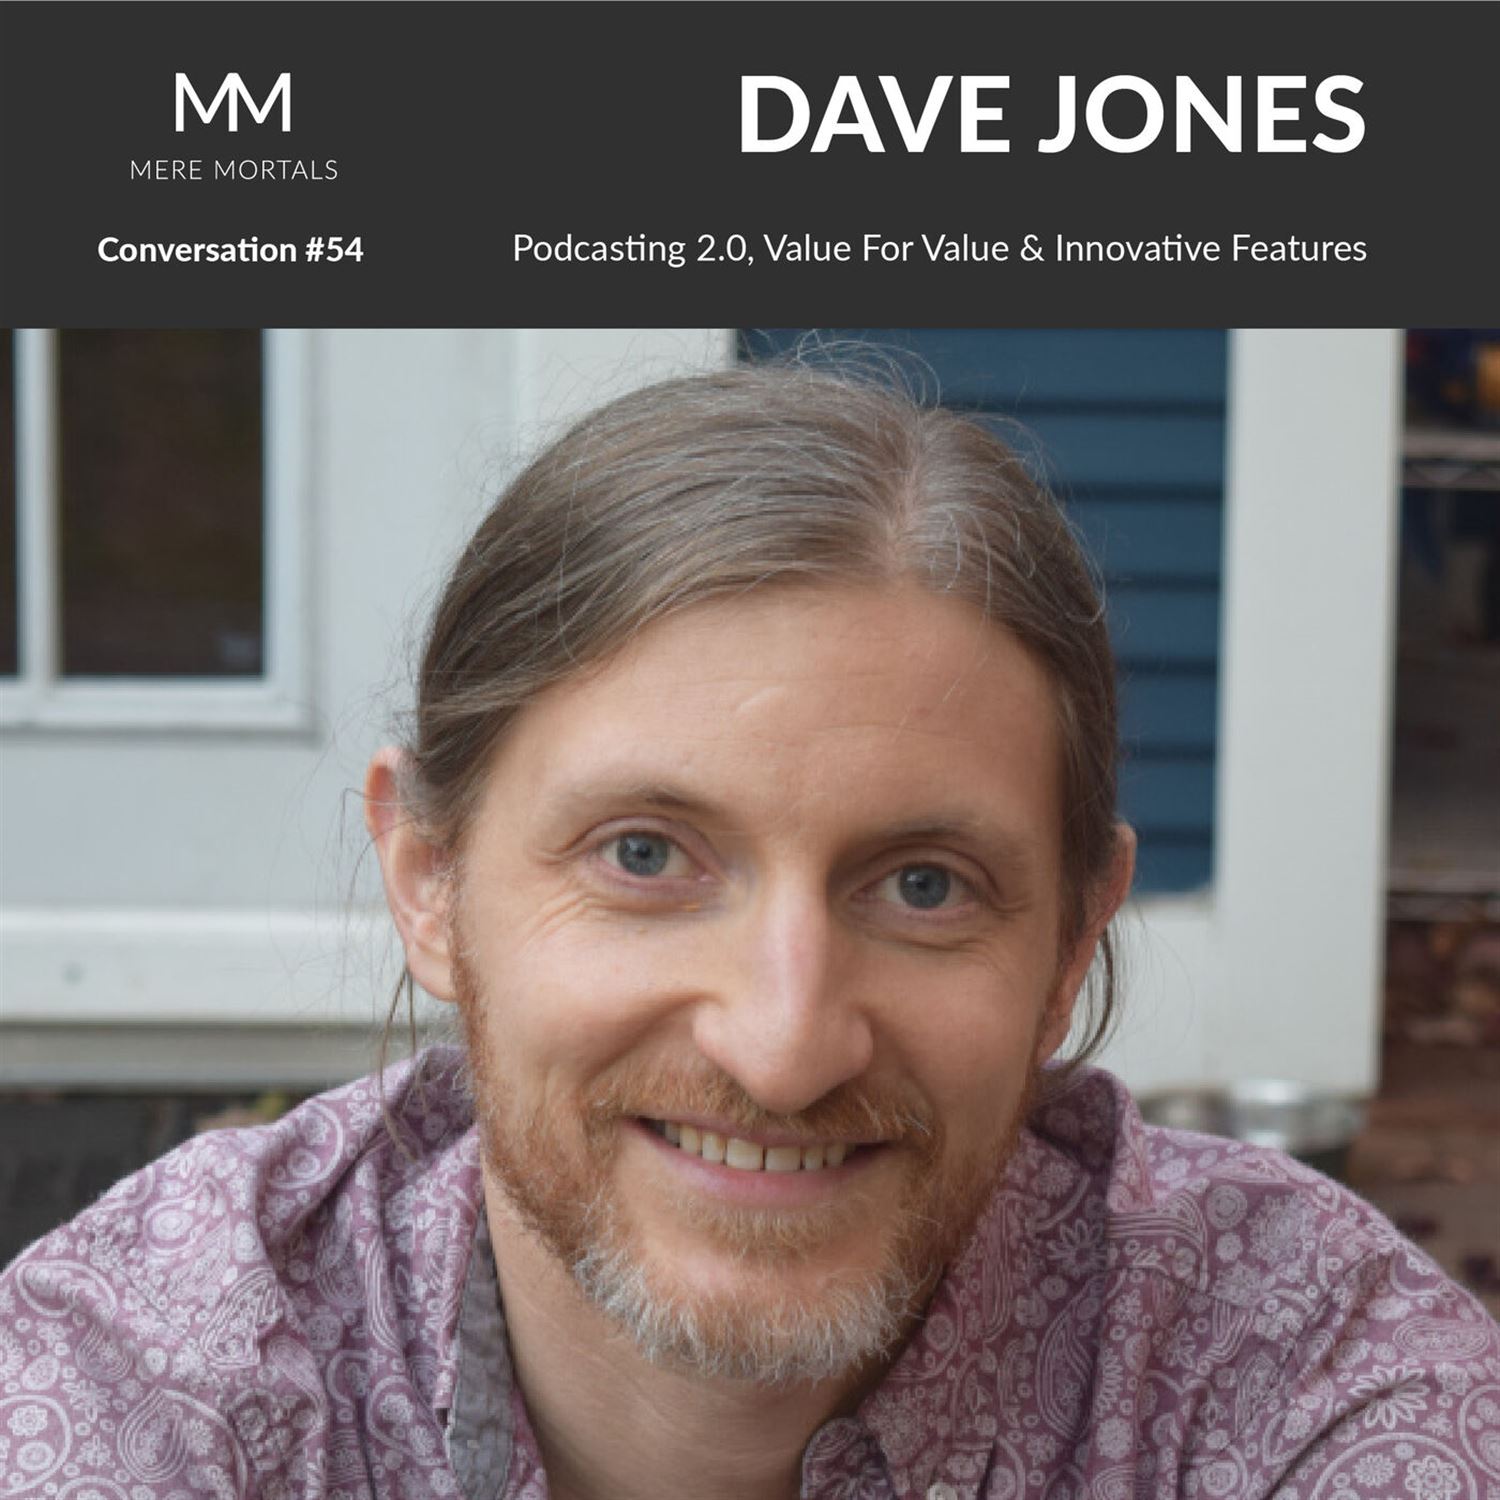 DAVE JONES | Podcasting 2.0, Value For Value & Innovative Features